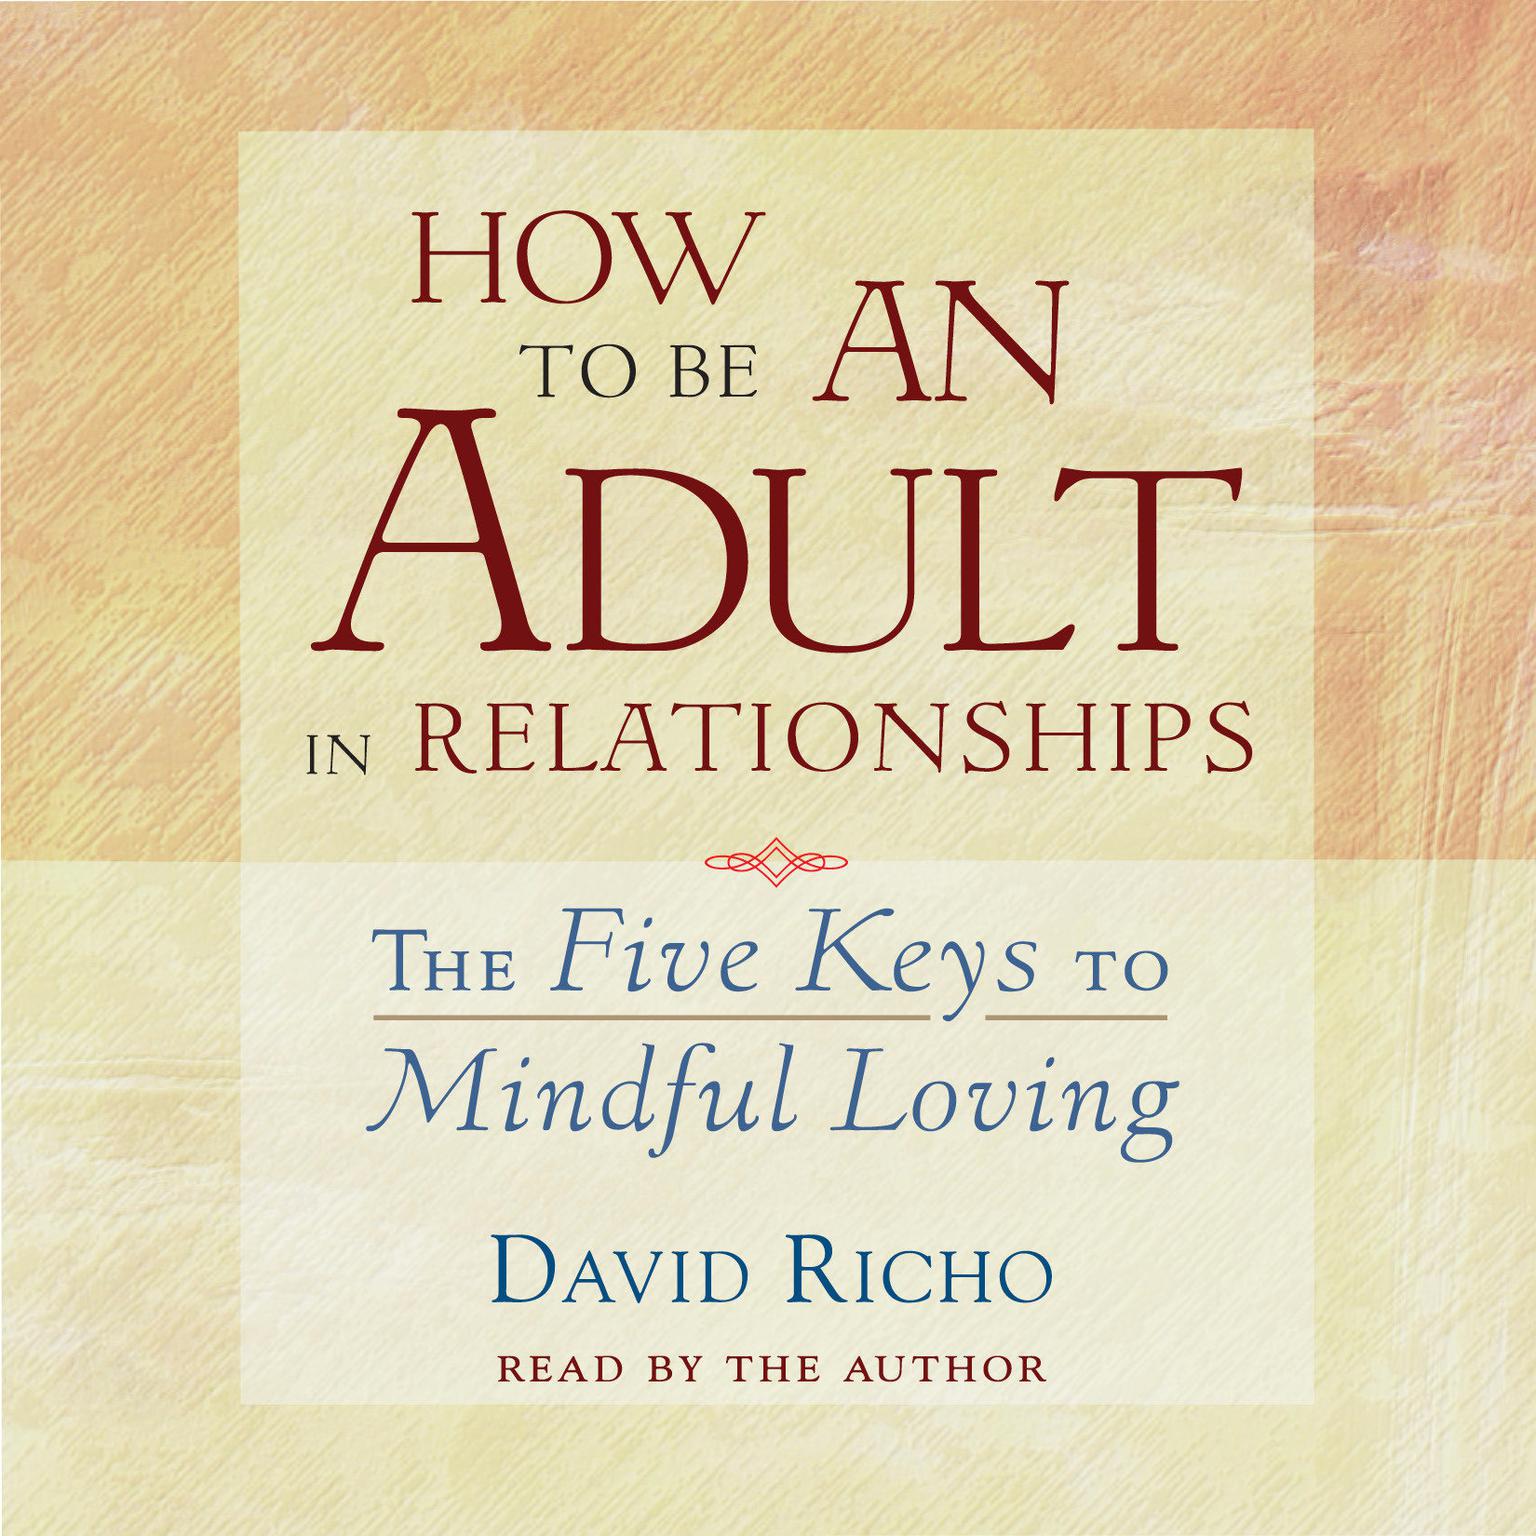 How to Be an Adult in Relationships: The Five Keys to Mindful Loving Audiobook, by David Richo